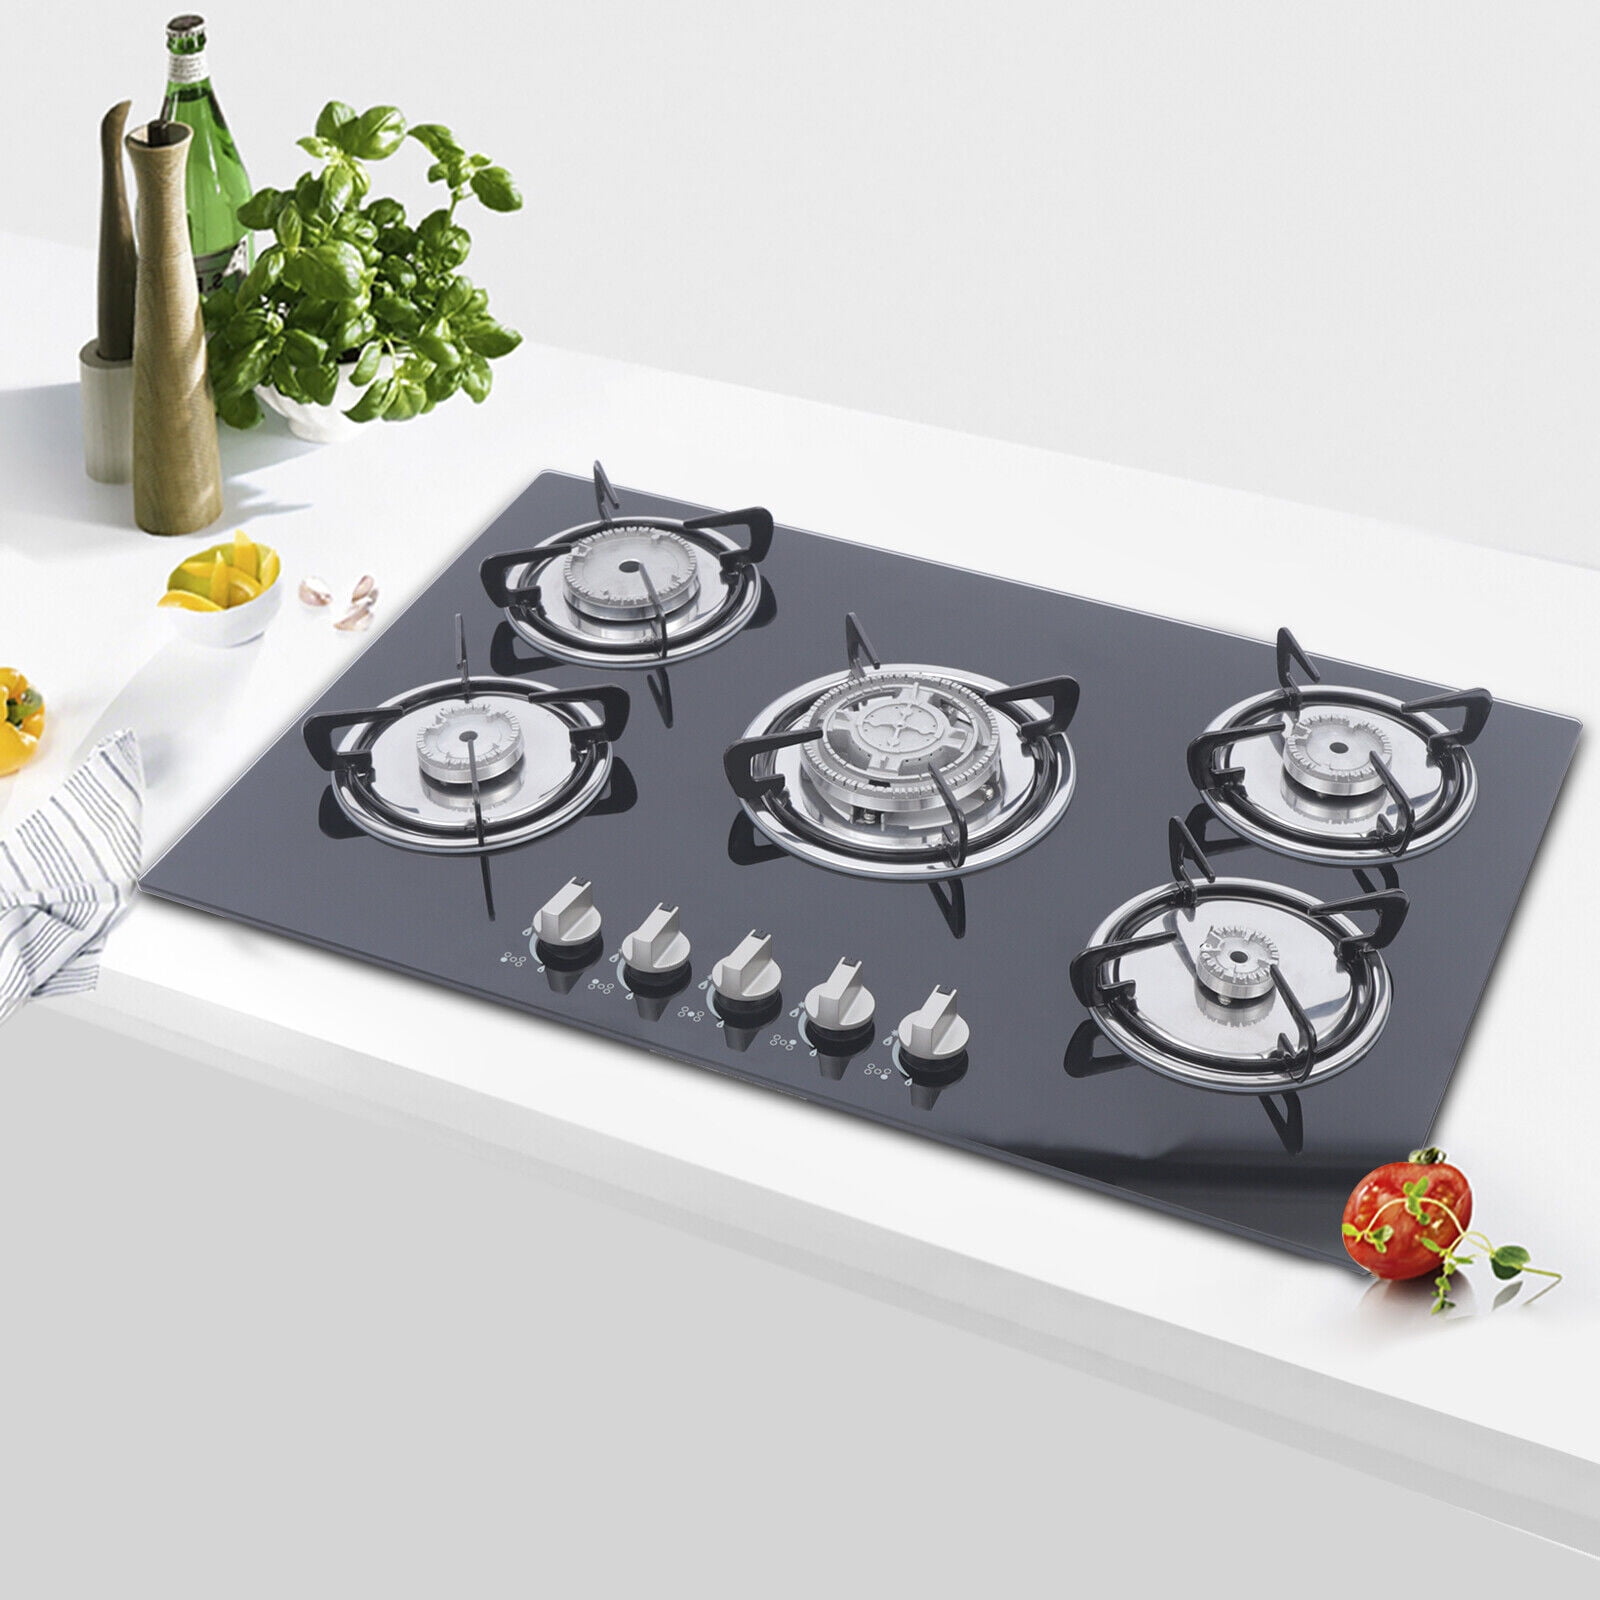 Gas hob Built-in Gas Cooktop,Table-Top Cooking, Cast Iron Portable Hob  Ring,NG/LPG Petroleum Gas Stove, for Kitchen Restaurant Apartments [Energy